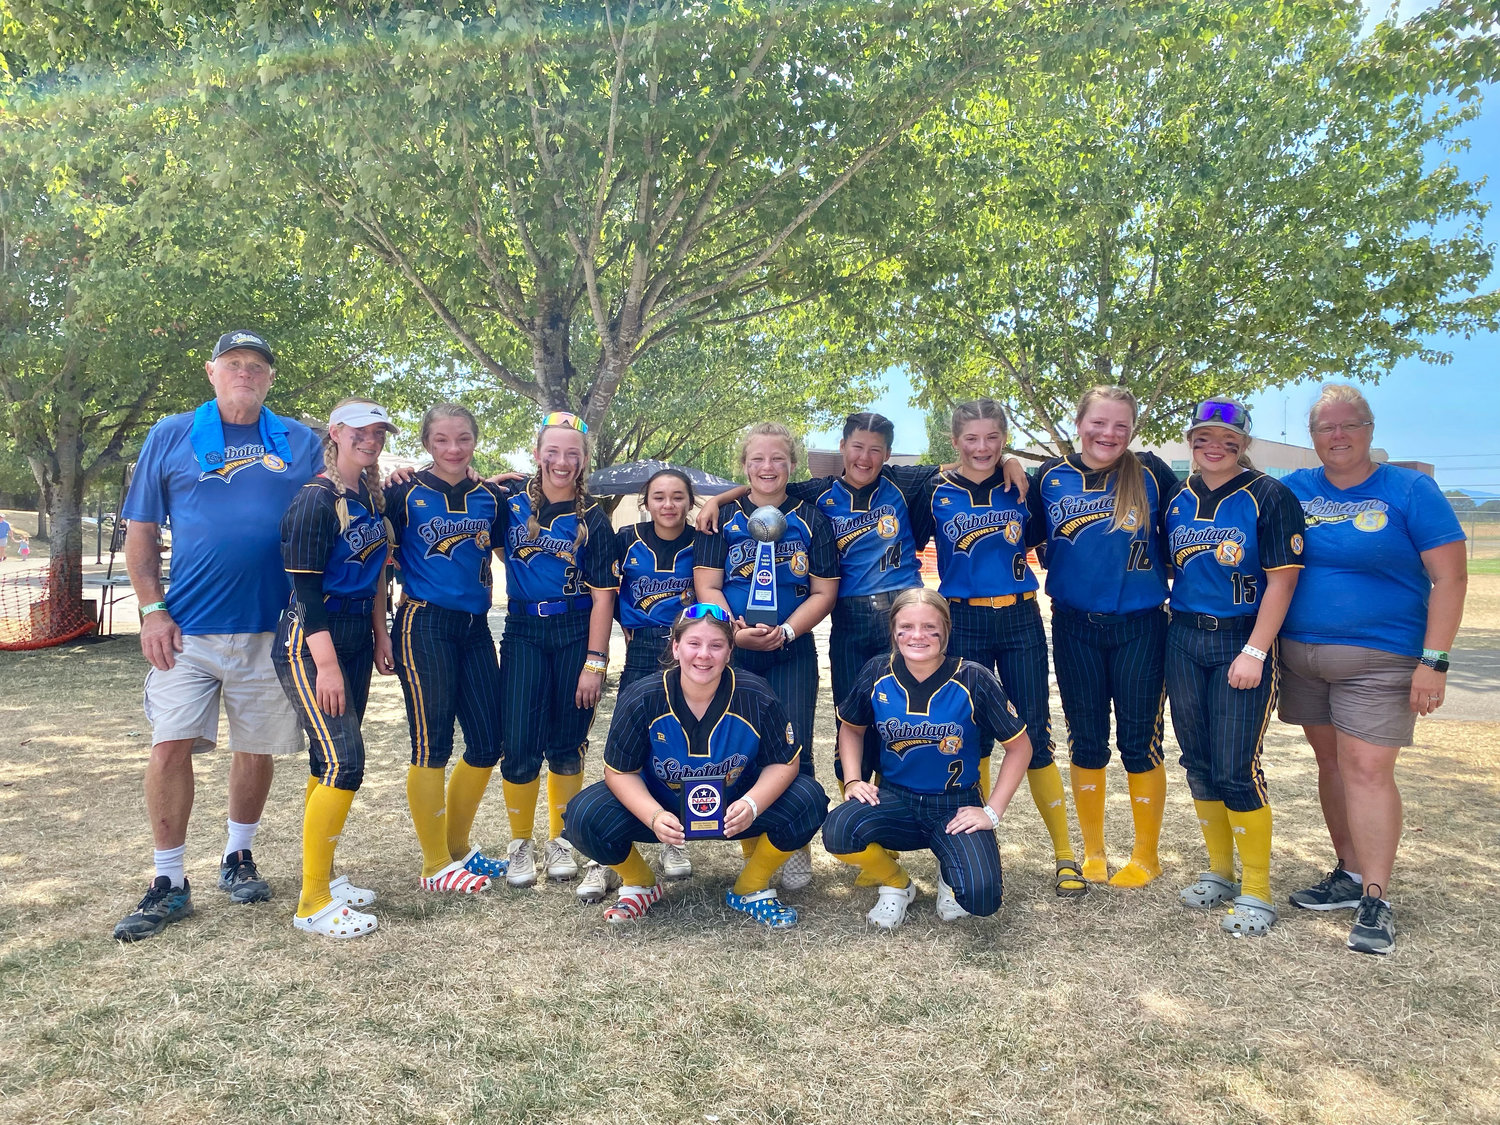 Sabotage NW 14U Fastpitch placed third out of 19 teams at the 2021 North American Fastpitch Association 14U National Championships this past weekend in Newberg Oregon. The ladies went 7-2 during the four-day tournament to claim the third-place trophy. Pictured from top left, coach Ken Sack, Ava Rodman, Hollynn Wakefield, Makenzie Erickson, Sophia Wiggs, Chloe Bonomi, Jordan Billie, Kylee Lyons, Payton Baumel, Addison Fox, coach Shannon Baumel. Bottom from left, Sophia Milanowski, Brooklyn Sprague.